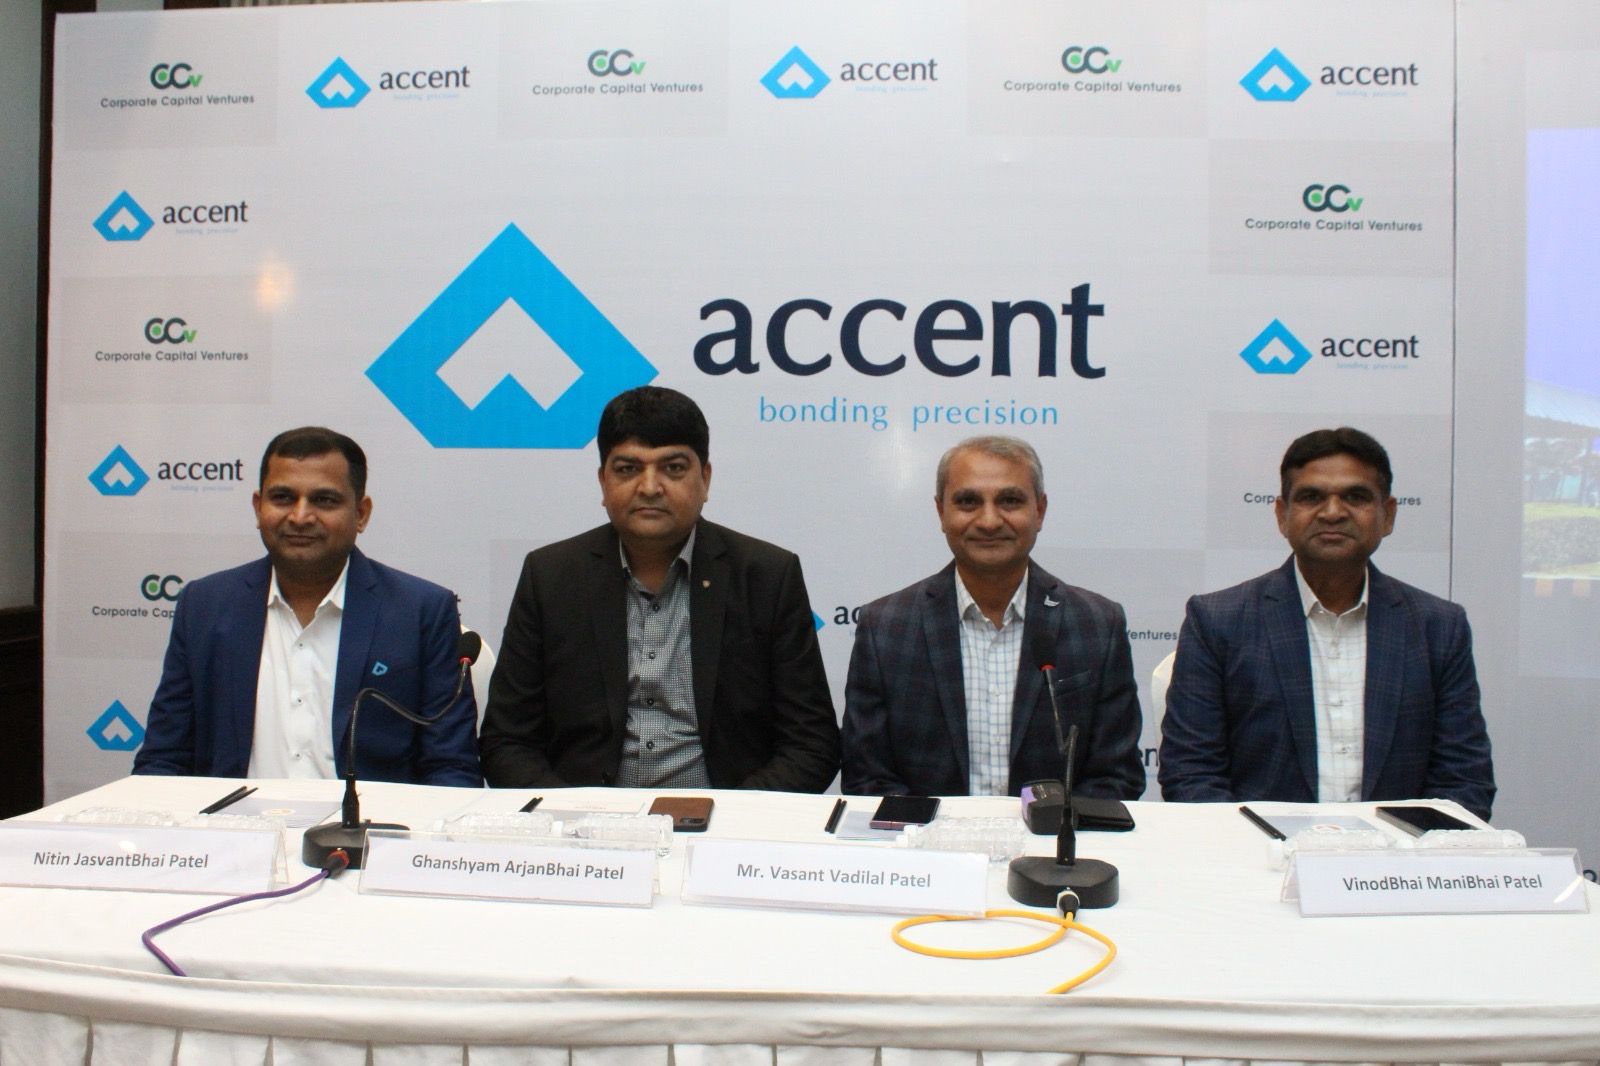 Accent Microcell IPO